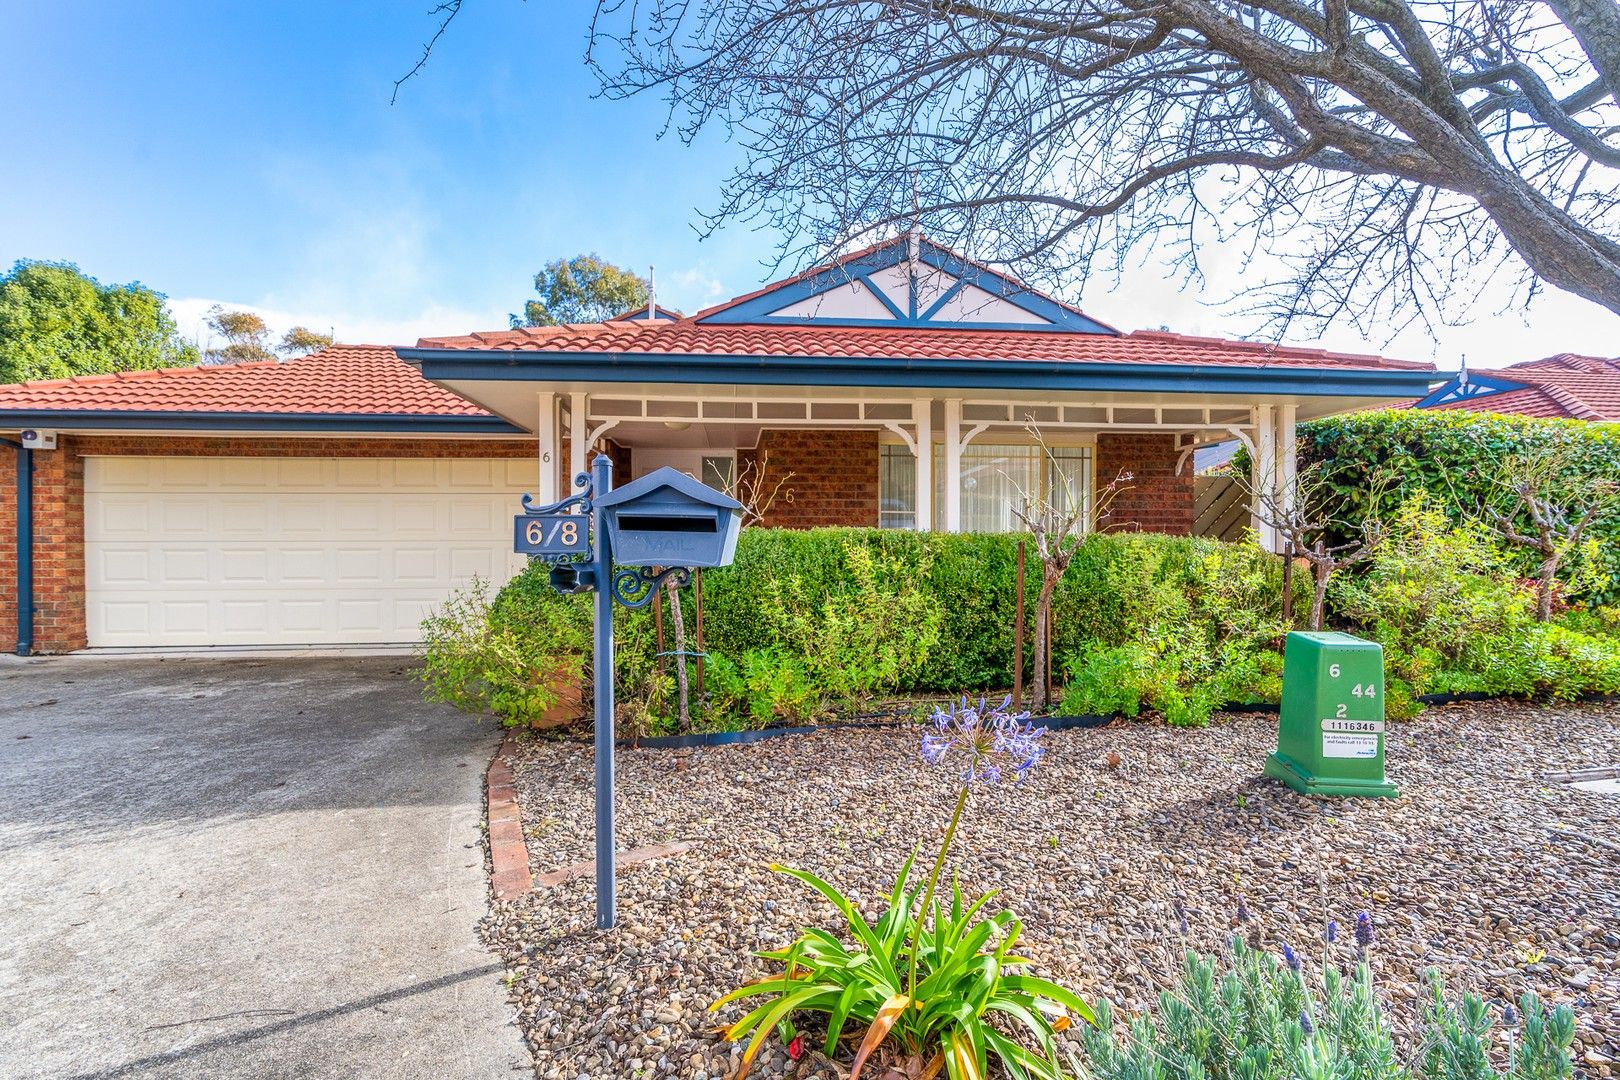 4 bedrooms Townhouse in 6/8 Cobbadah Street O'MALLEY ACT, 2606